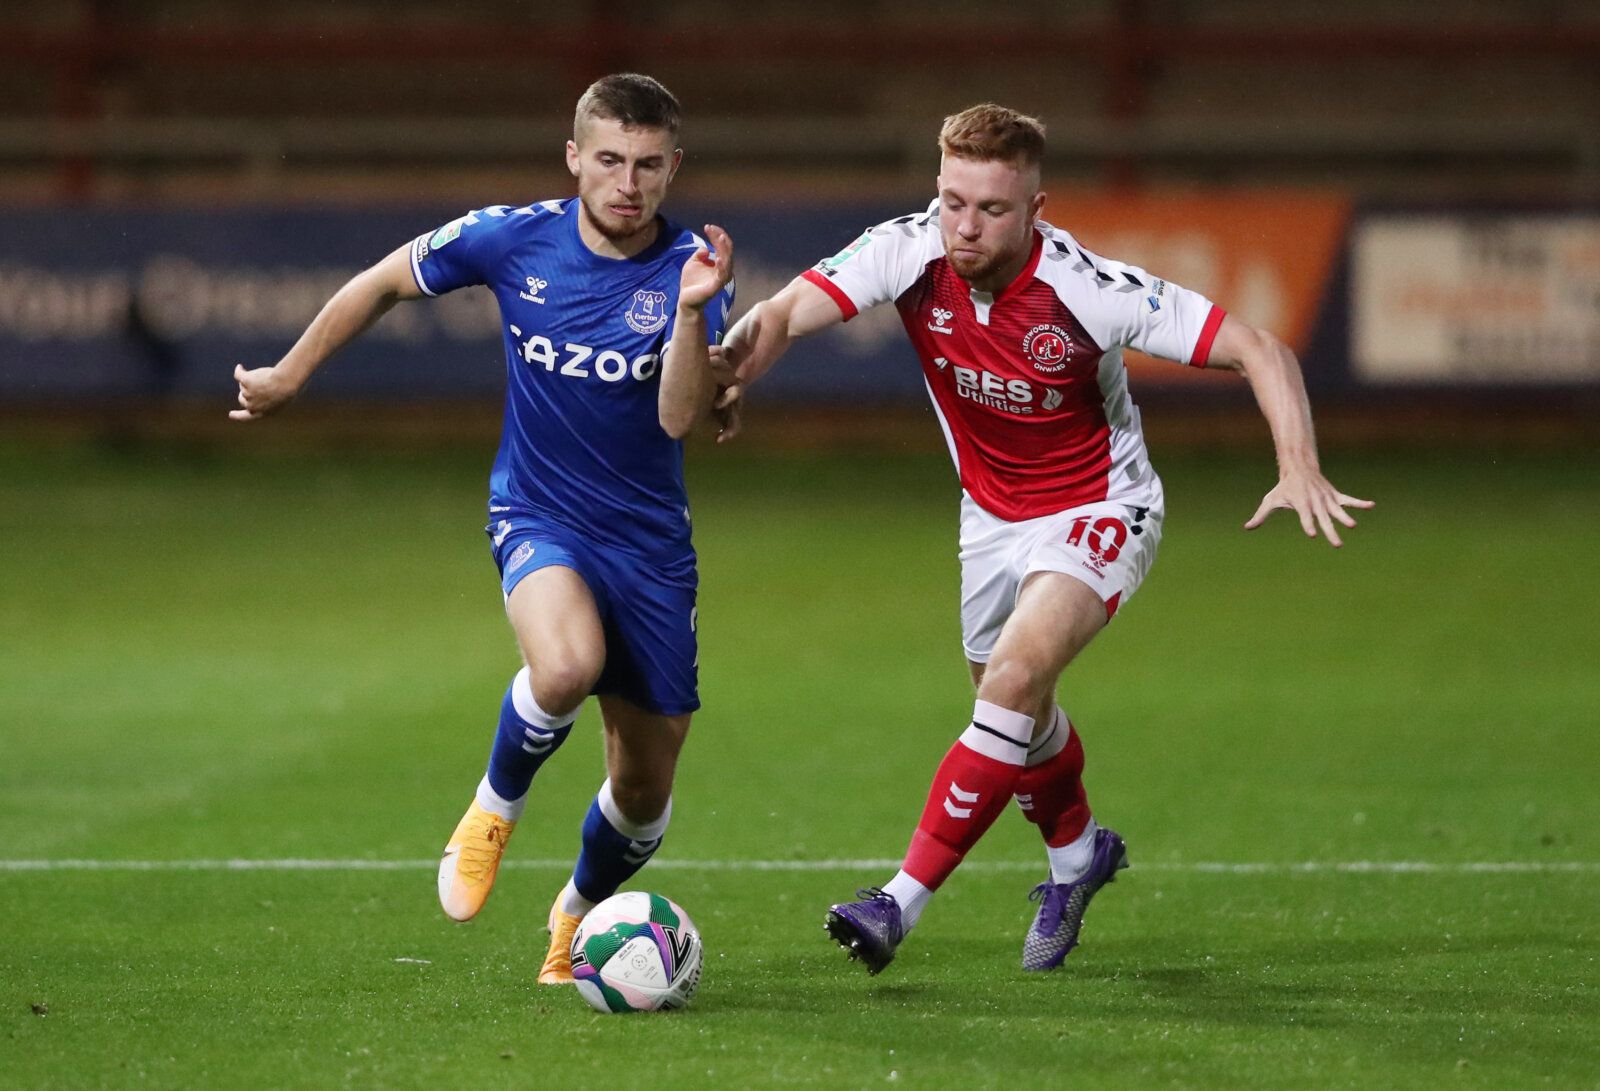 Soccer Football - Carabao Cup Third Round - Fleetwood Town v Everton - Highbury Stadium, Fleetwood, Britain - September 23, 2020 Fleetwood Town's Callum Camps in action with Everton's Jonjoe Kenny Pool via REUTERS/Alex Livesey EDITORIAL USE ONLY. No use with unauthorized audio, video, data, fixture lists, club/league logos or 'live' services. Online in-match use limited to 75 images, no video emulation. No use in betting, games or single club/league/player publications.  Please contact your acco